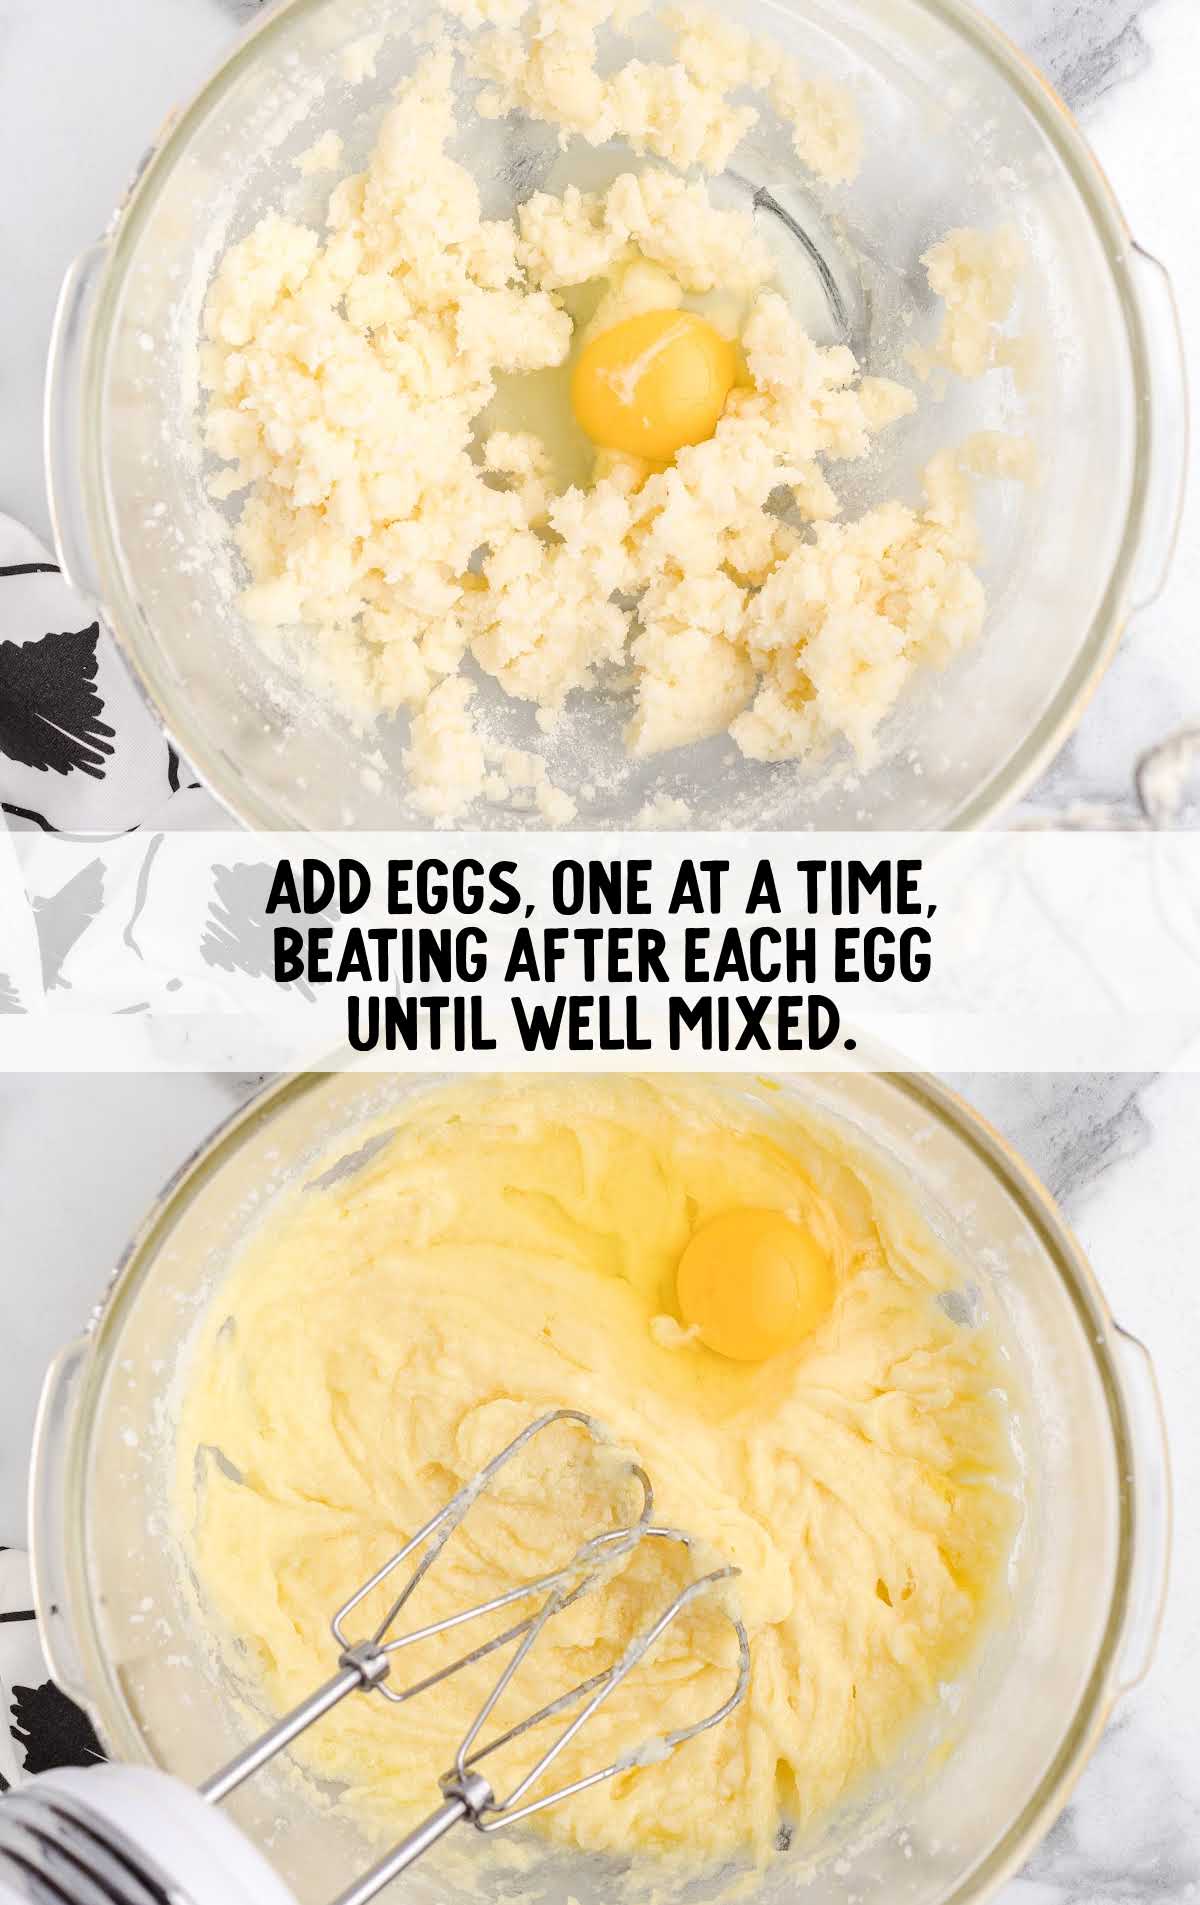 eggs added to the flour mixture and blended in a bowl